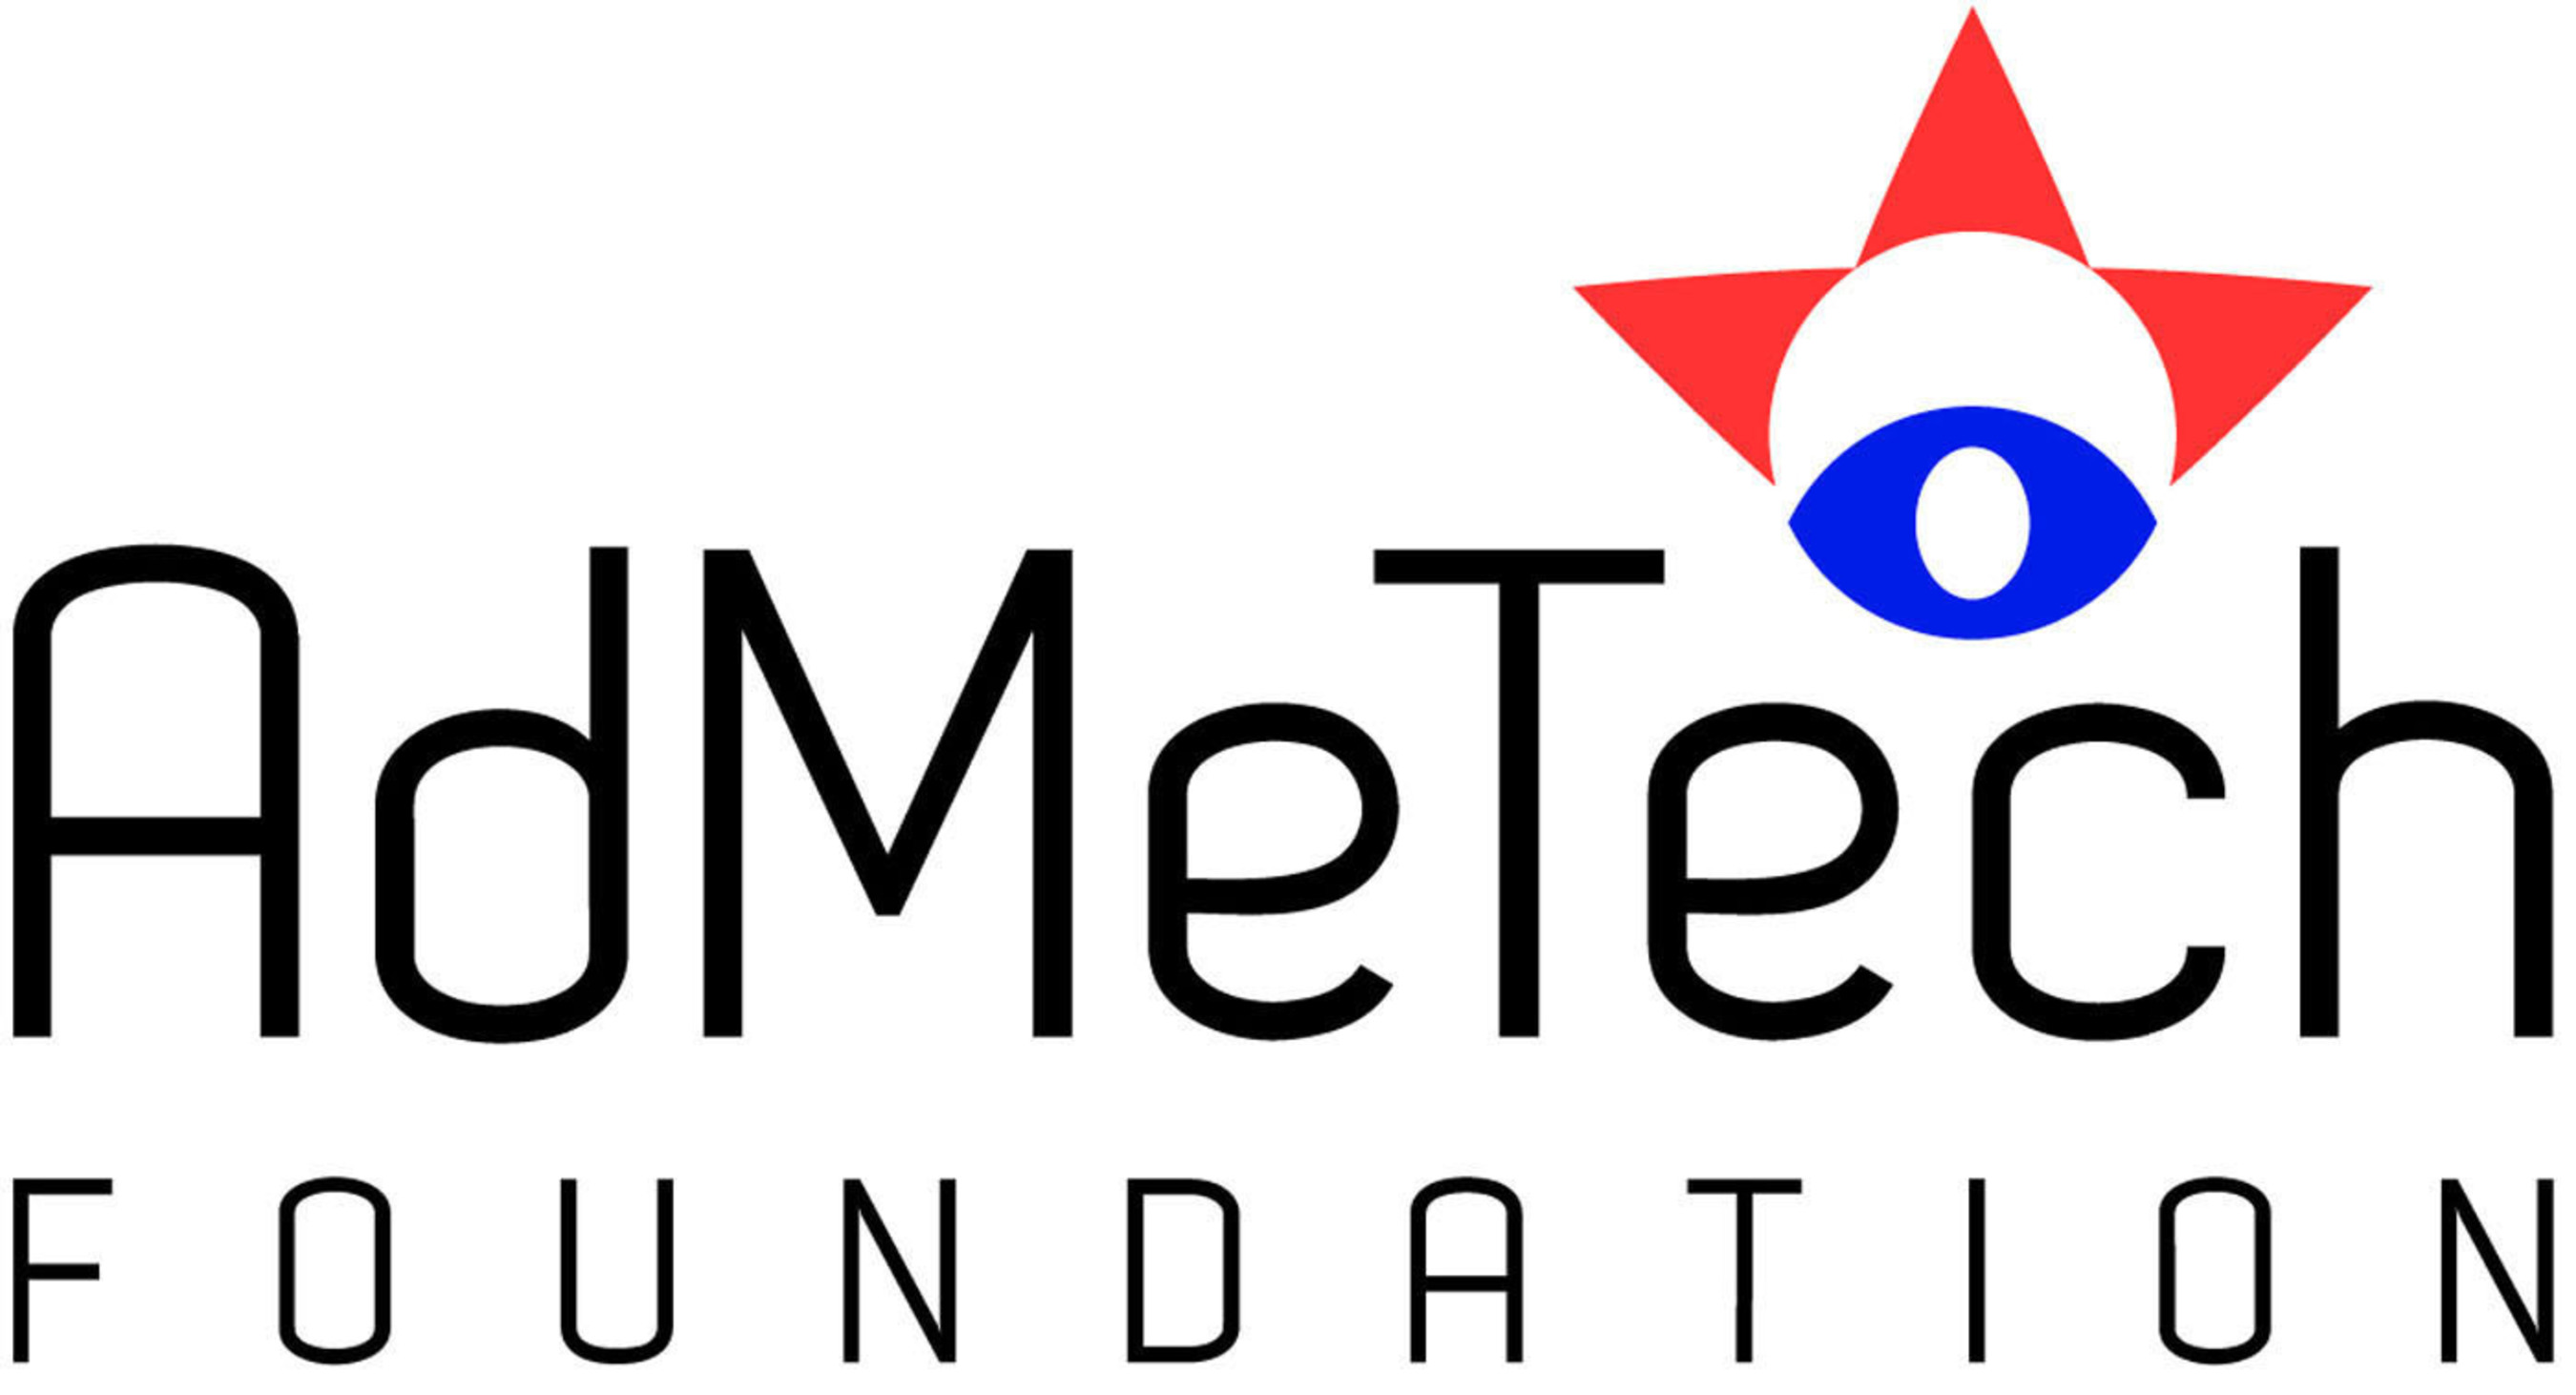 AdMeTech Foundation is a 501(c)(3) non-profit organization dedicated to fighting prostate cancer through the advancement of early detection and treatment.